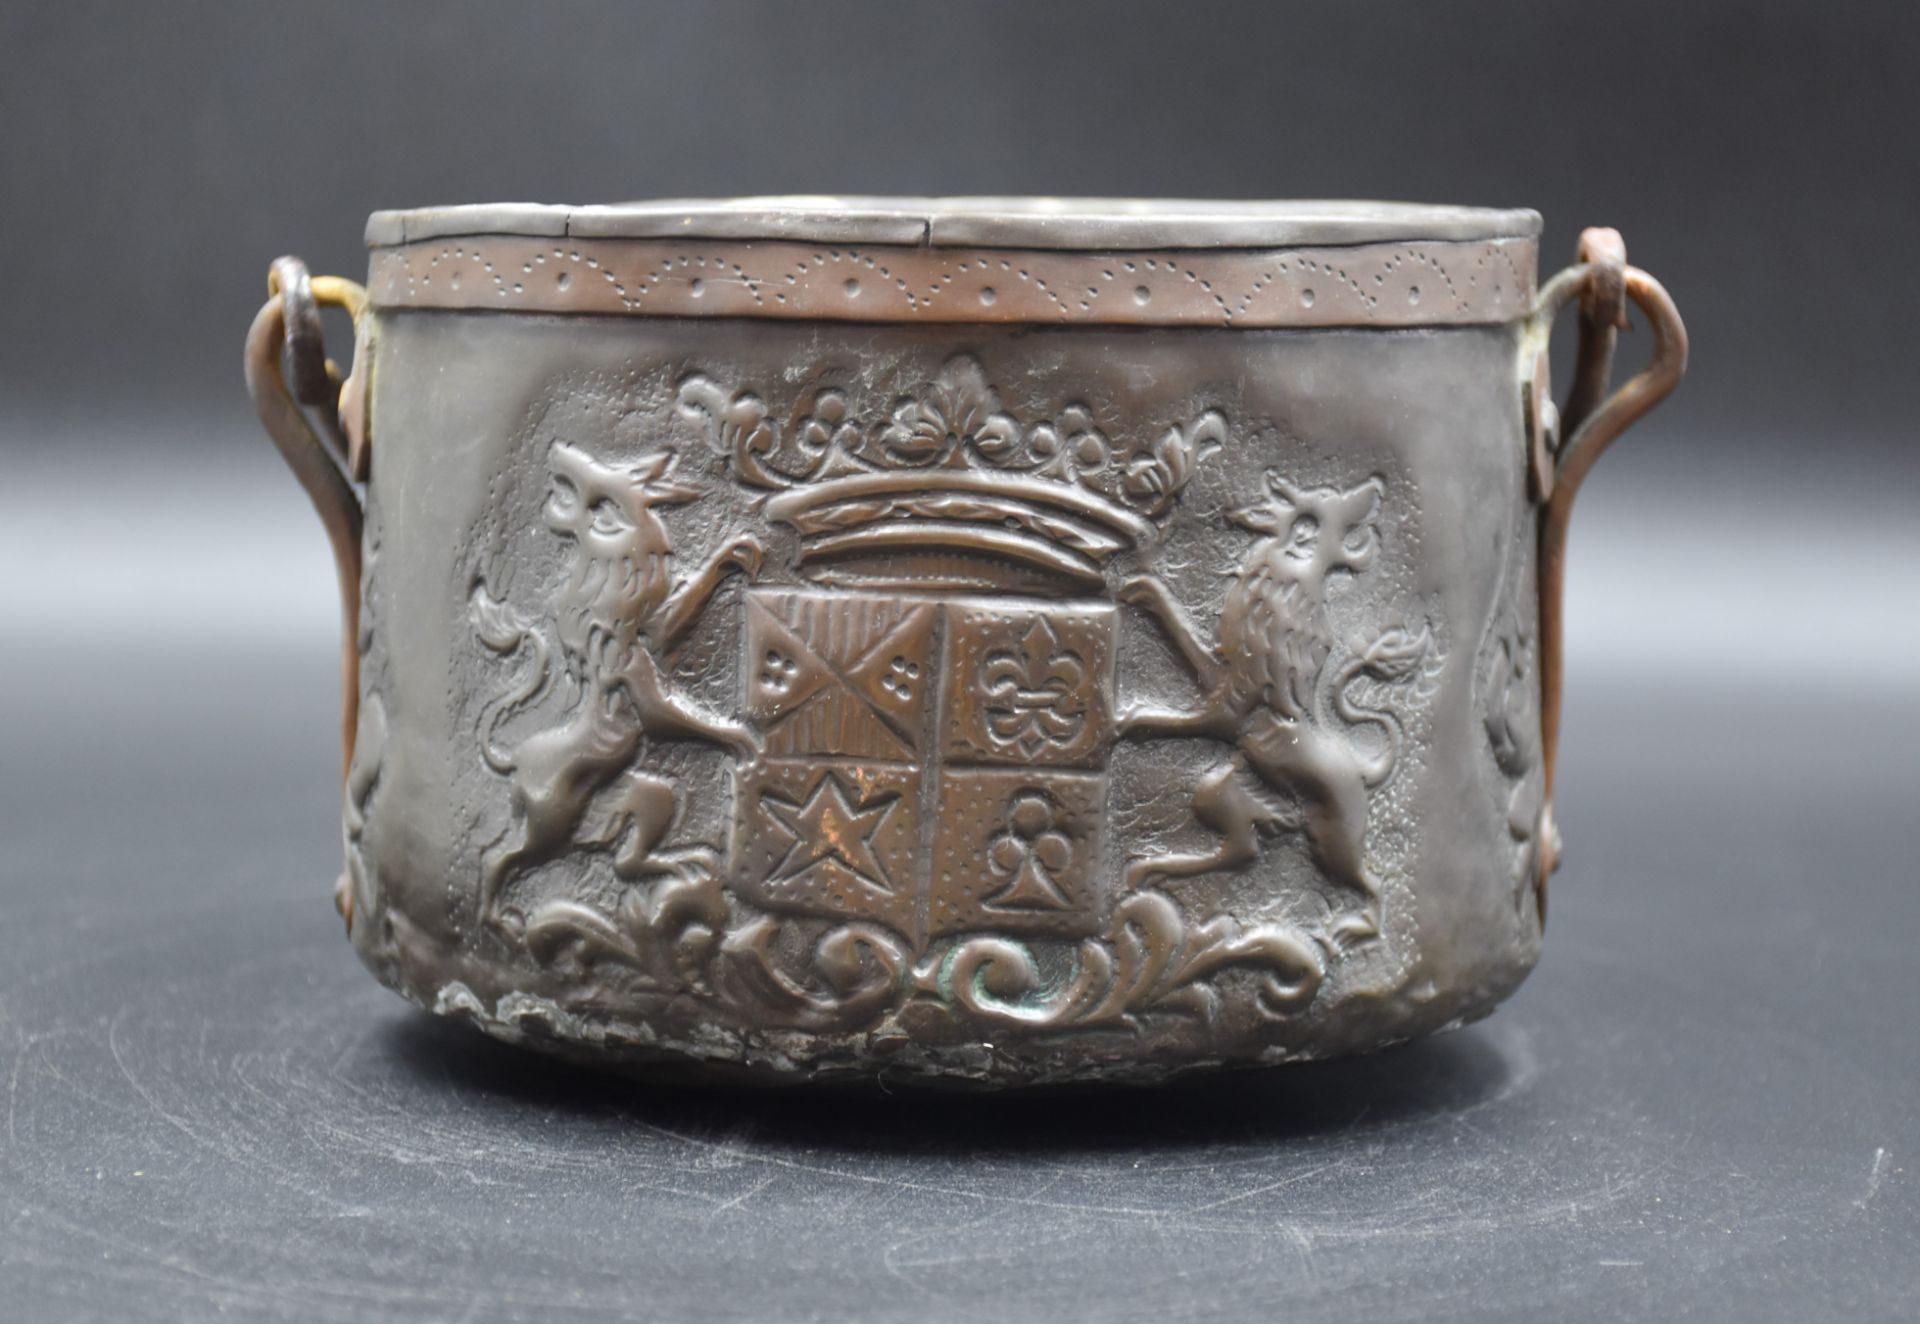 18th century copper cauldron with fleur-de-lis, coat of arms decoration and marquis crown. Height : 